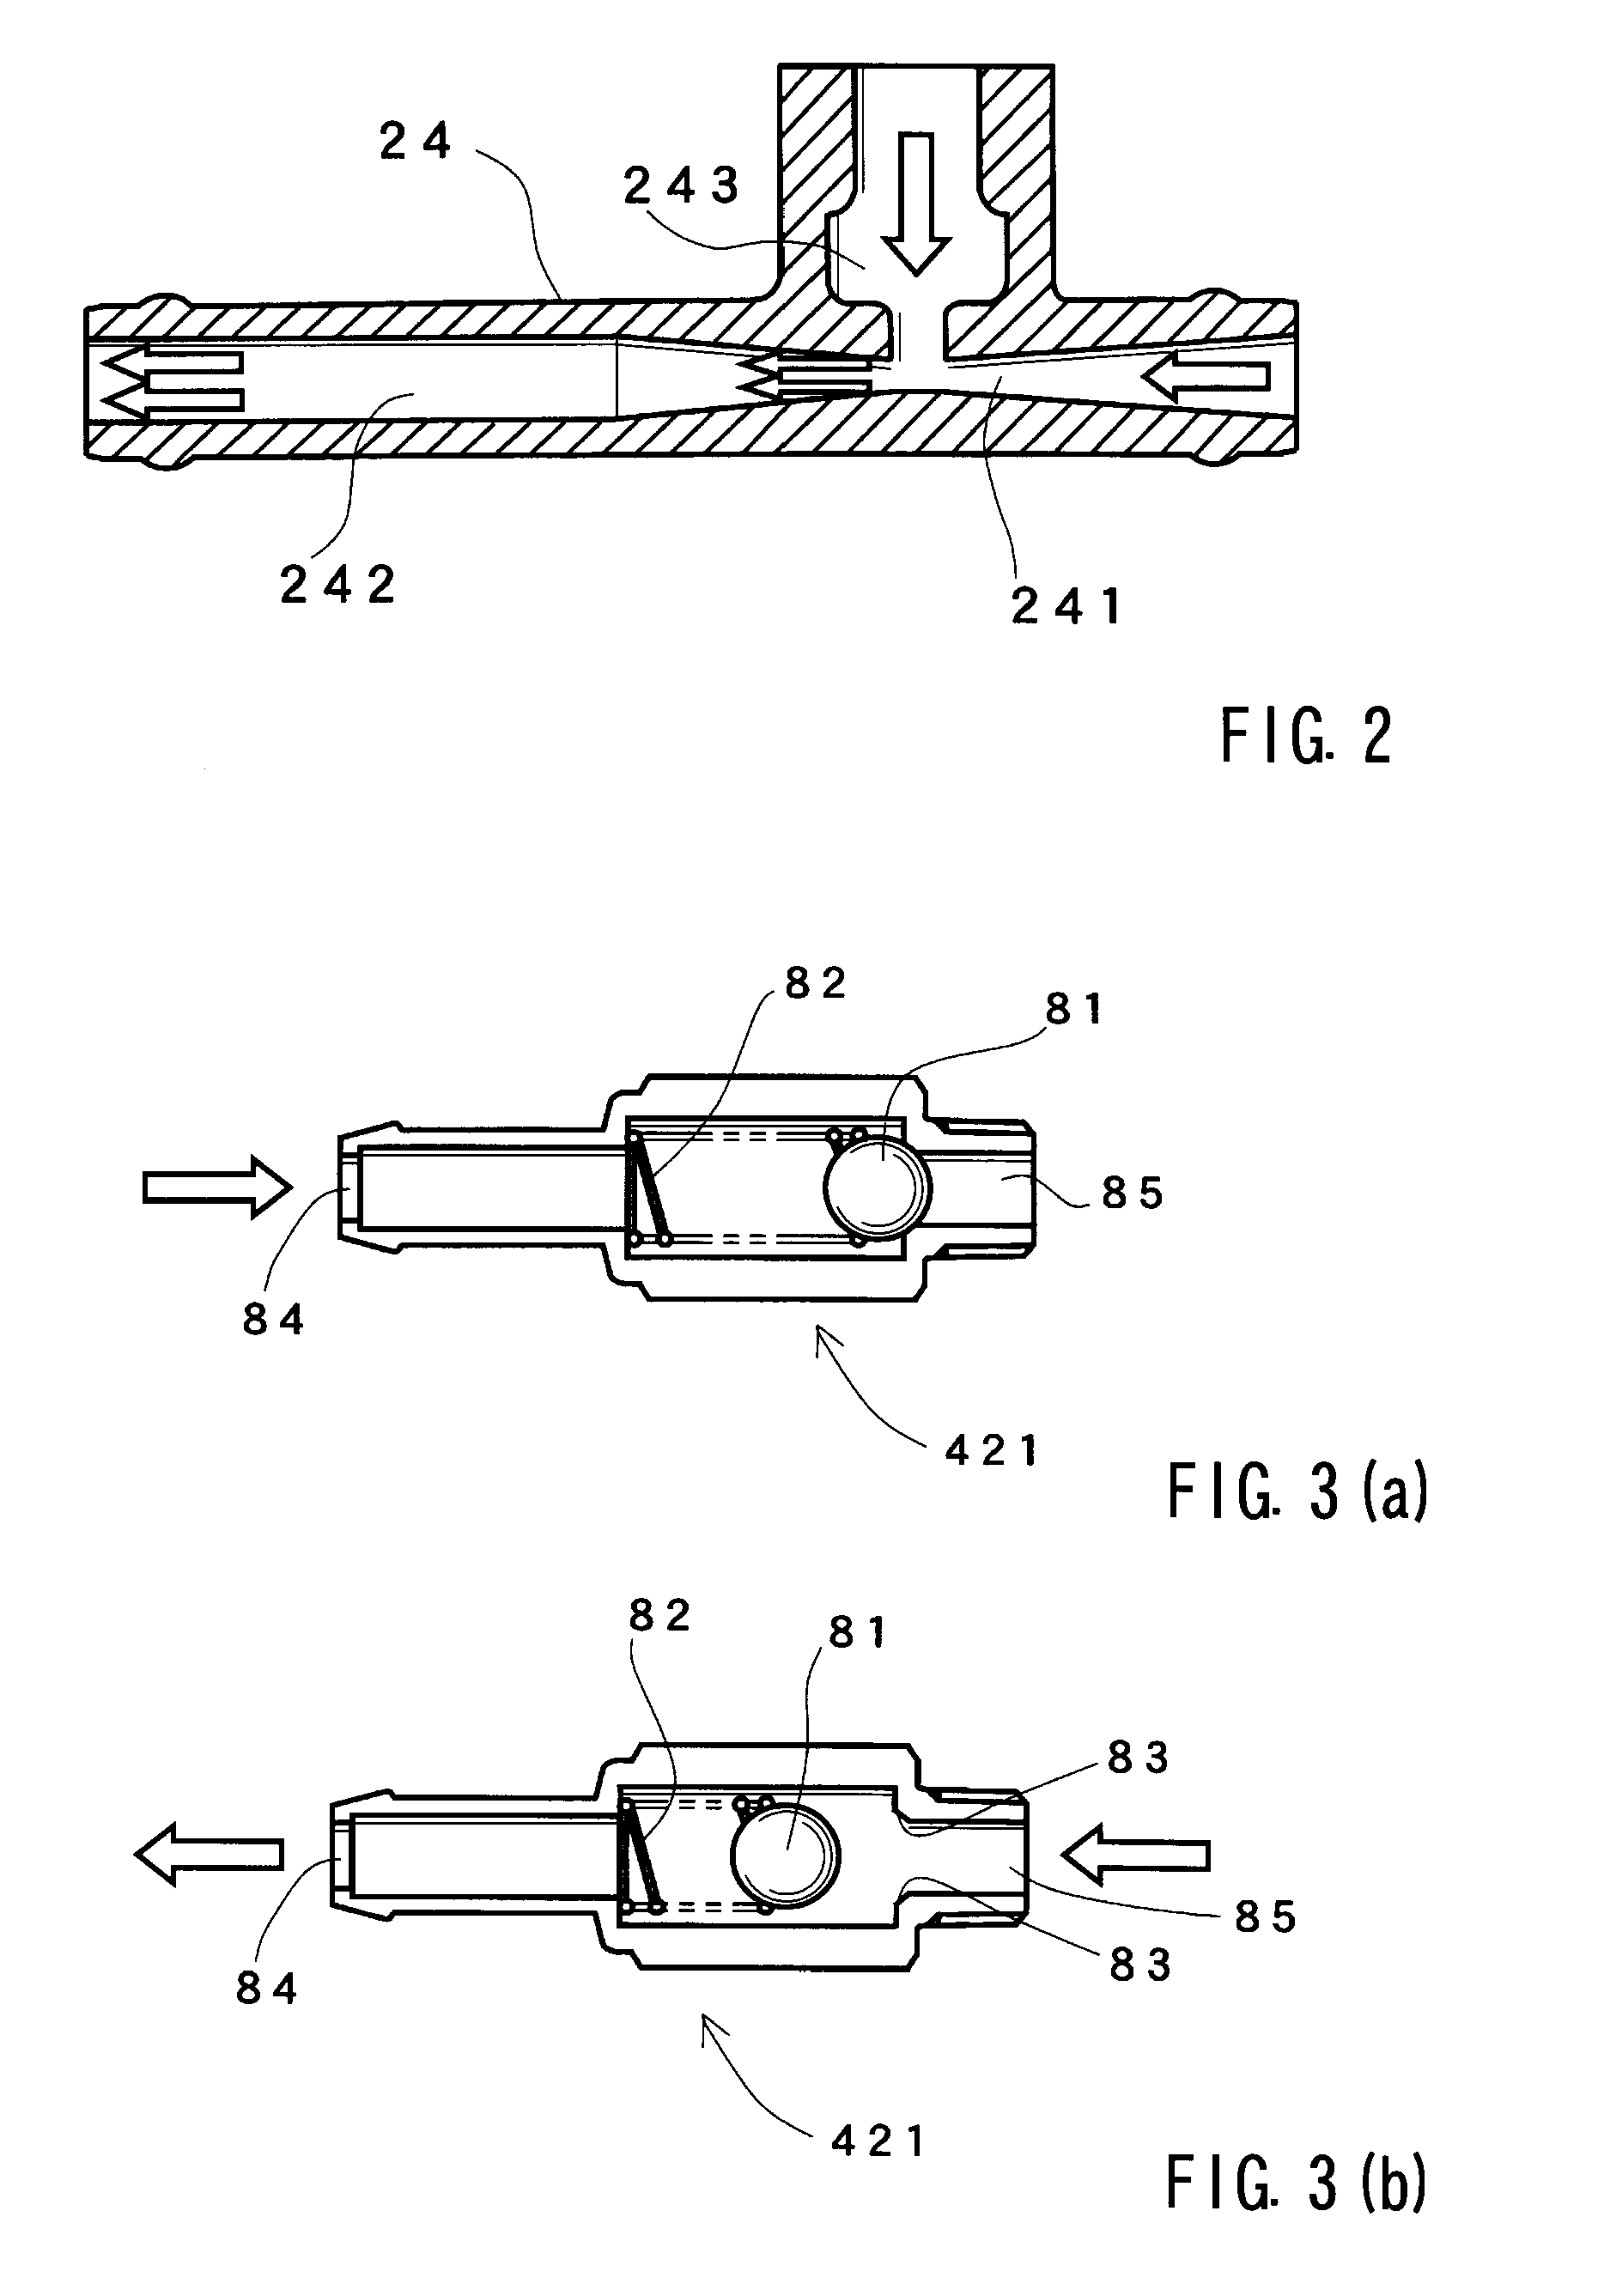 Blow-by gas refluxing device